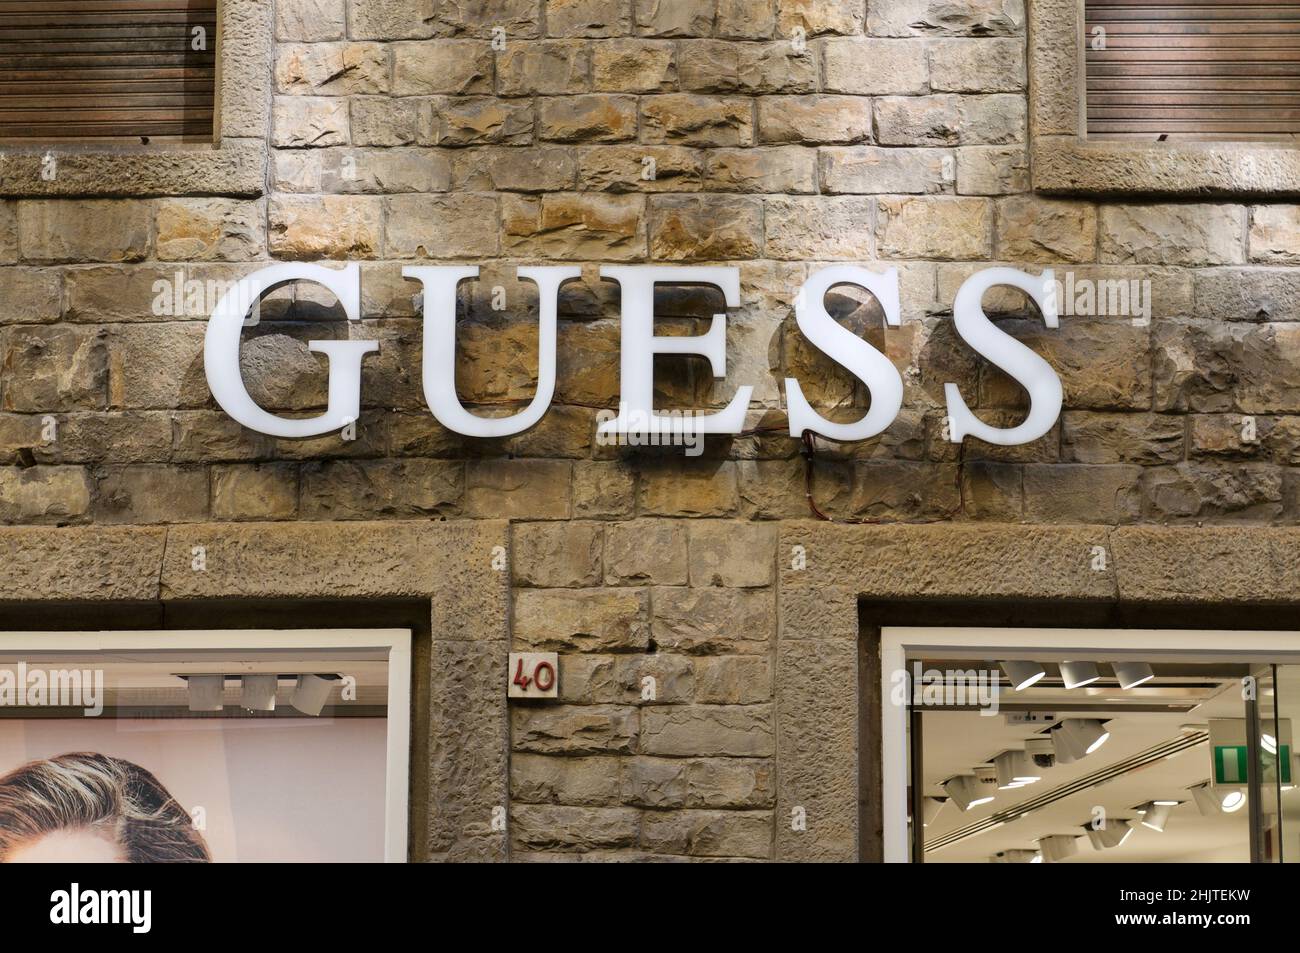 Firenze, Tuscany, Italy - 27th September 2021 : Illuminated GUESS sign hanging in on a store in Florence, Italy. Guess is an American clothing brand a Stock Photo